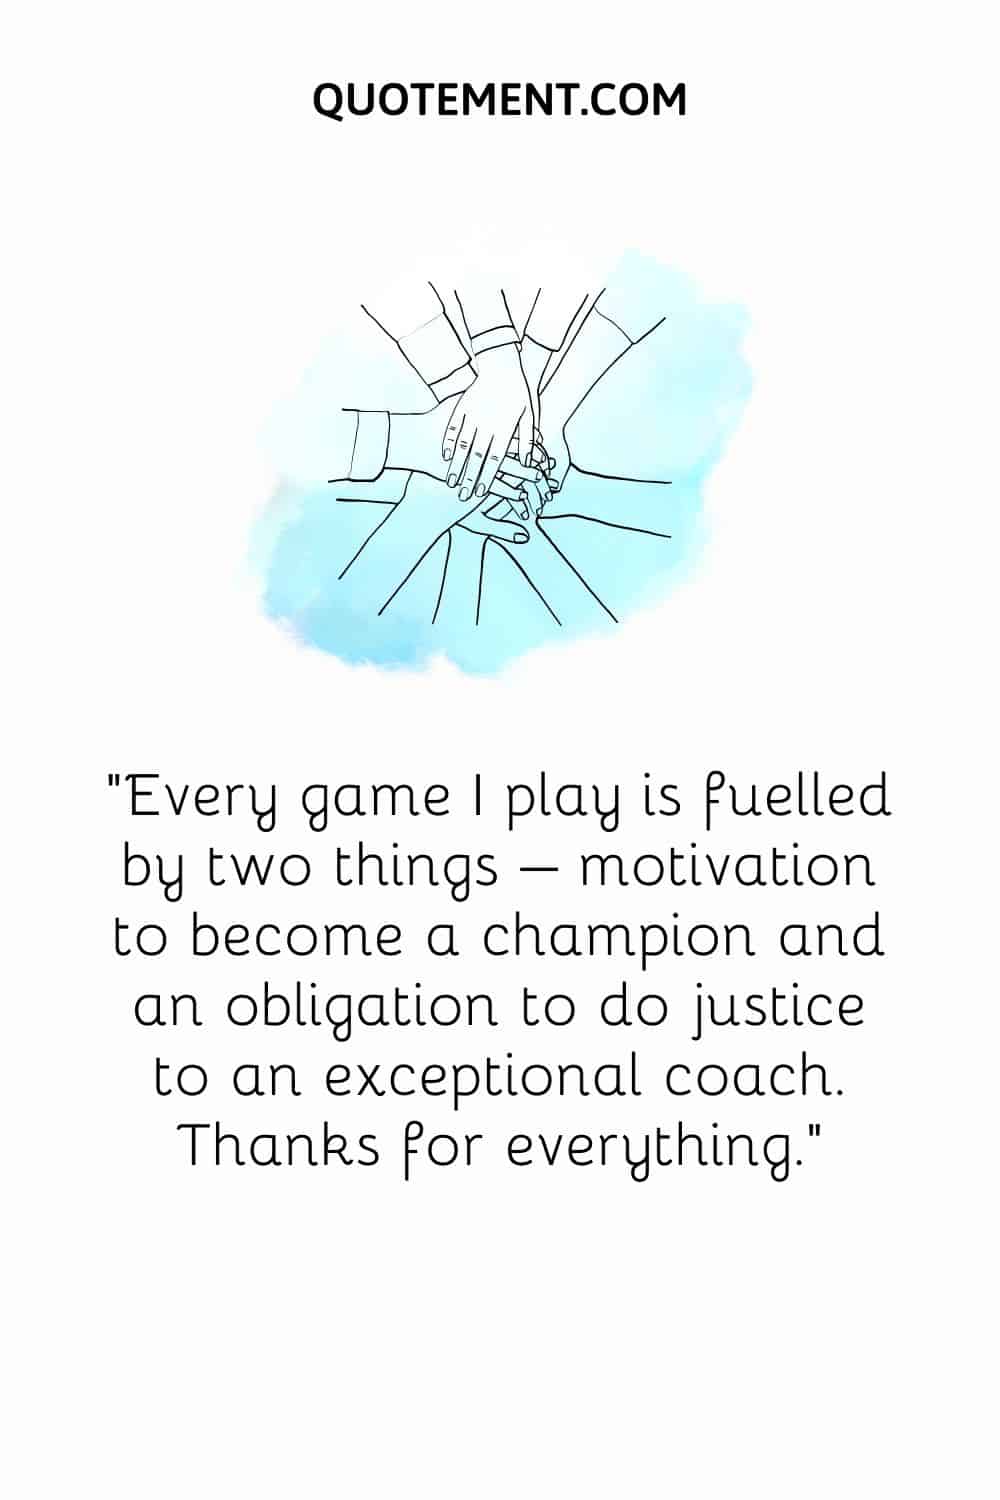 Every game I play is fuelled by two things – motivation to become a champion and an obligation to do justice to an exceptional coach